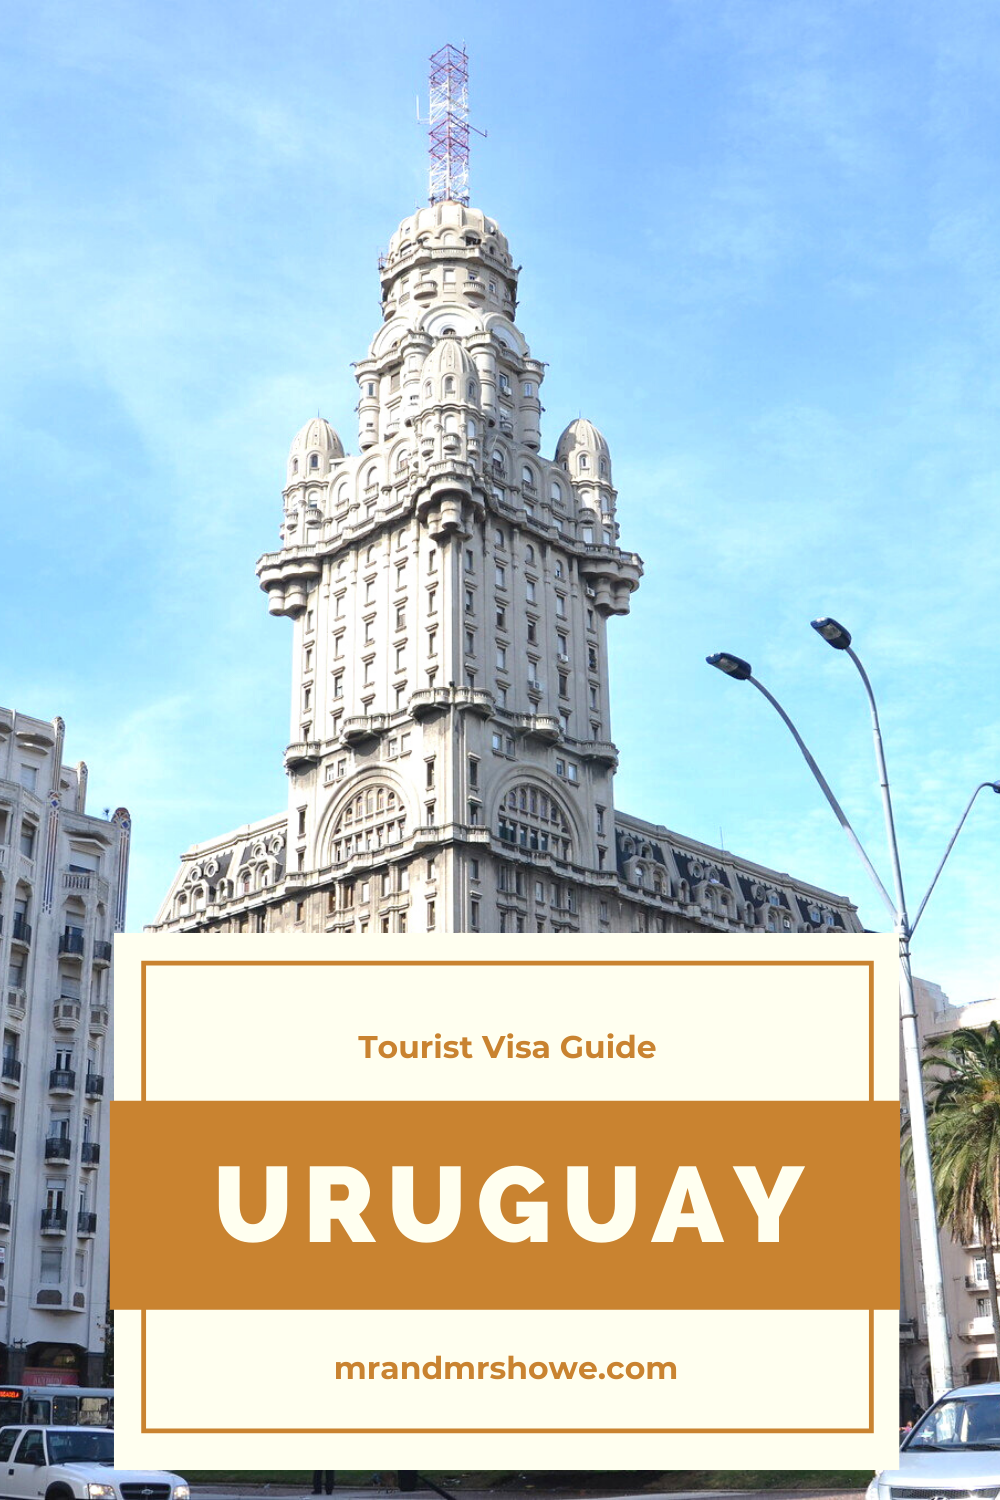 How To Get Uruguay Tourist Visa With Your Philippines Passport1.png